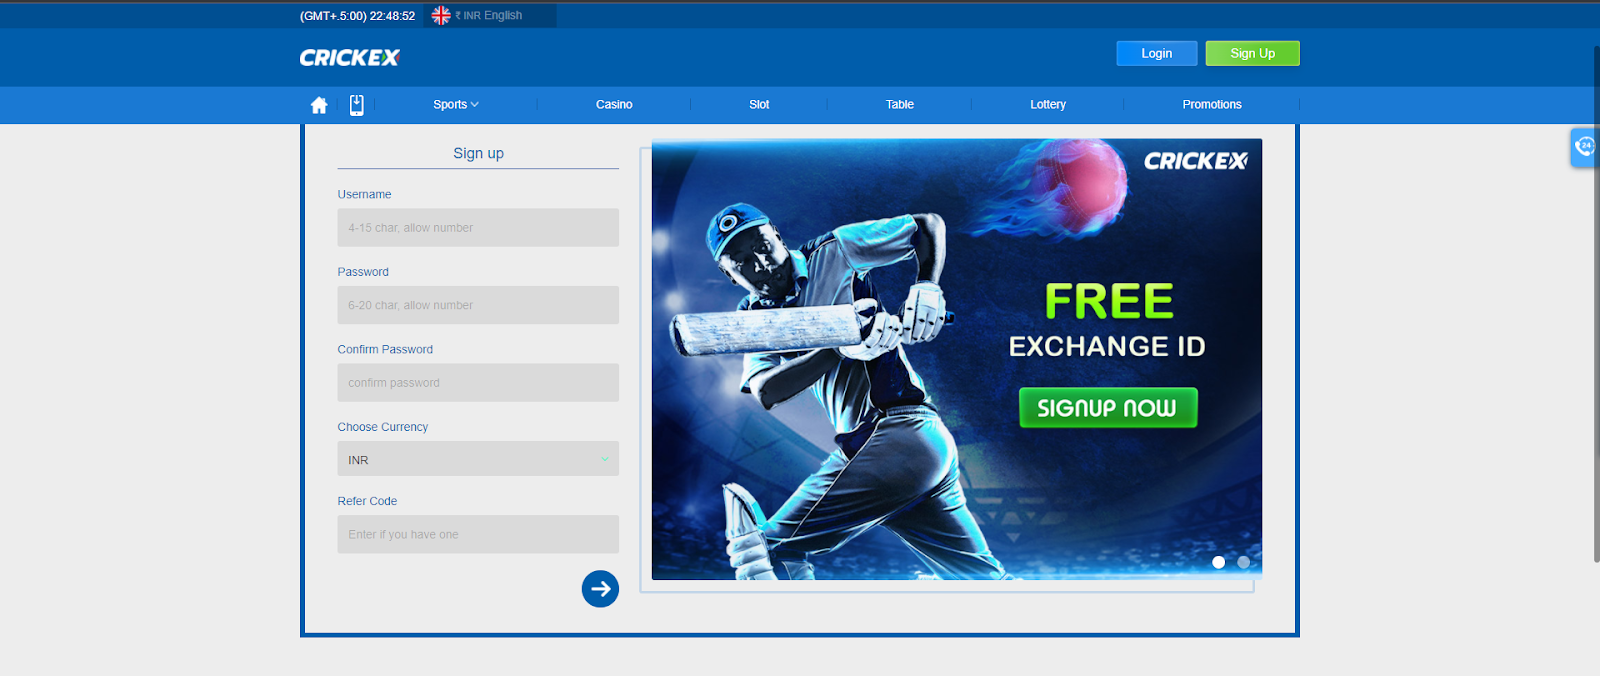 cricket sign up page